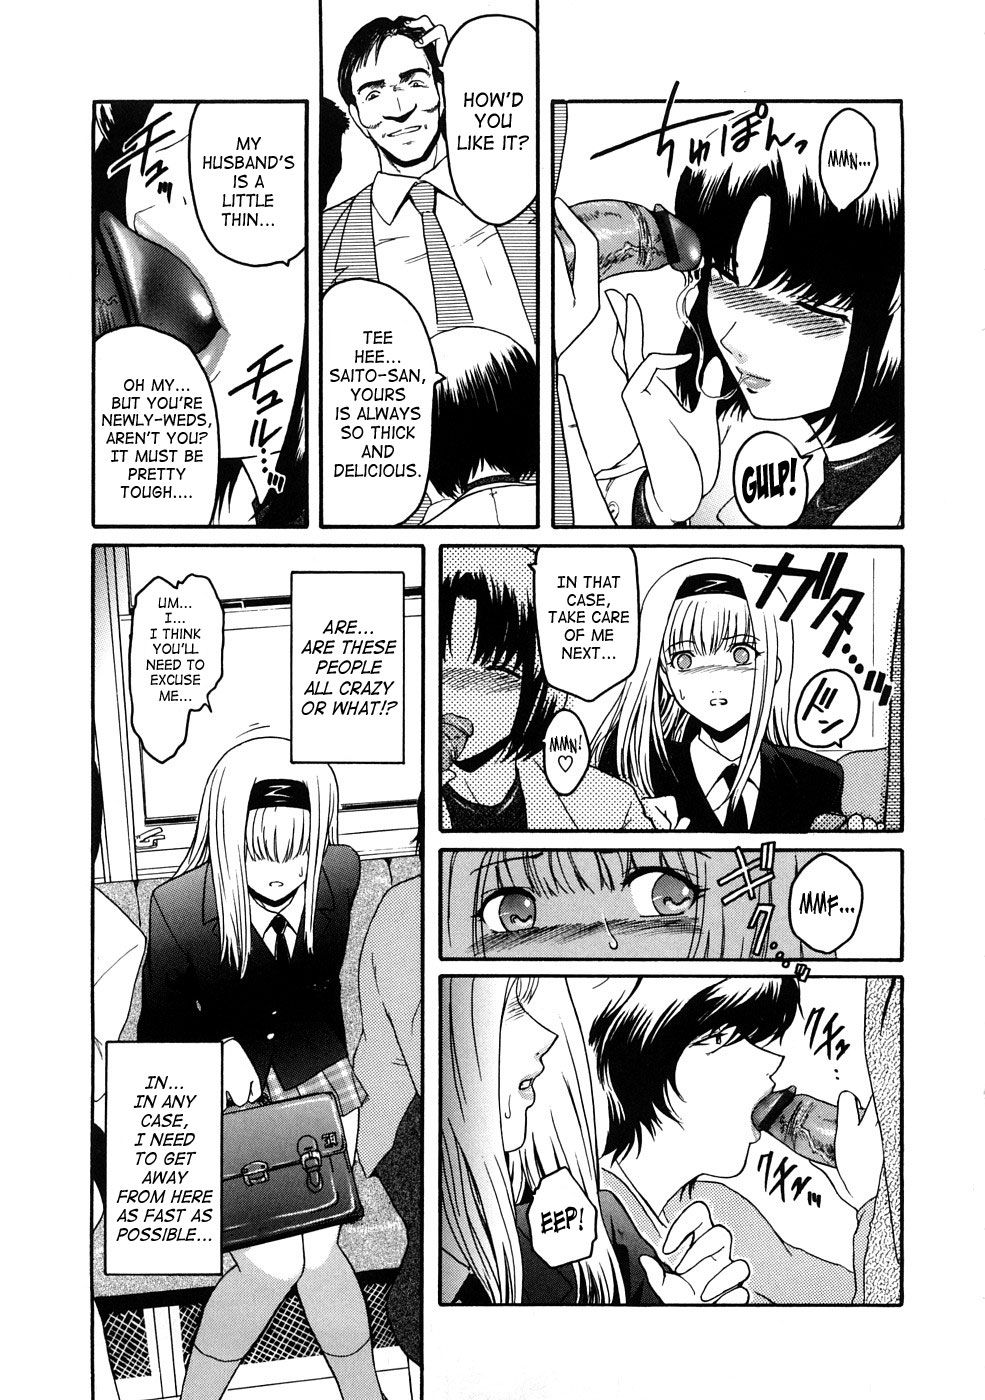 Second Virgin-Chapter 7 - breakfast club-Hentai Manga Hentai Comic - Page: 5 - Online porn video at mobile